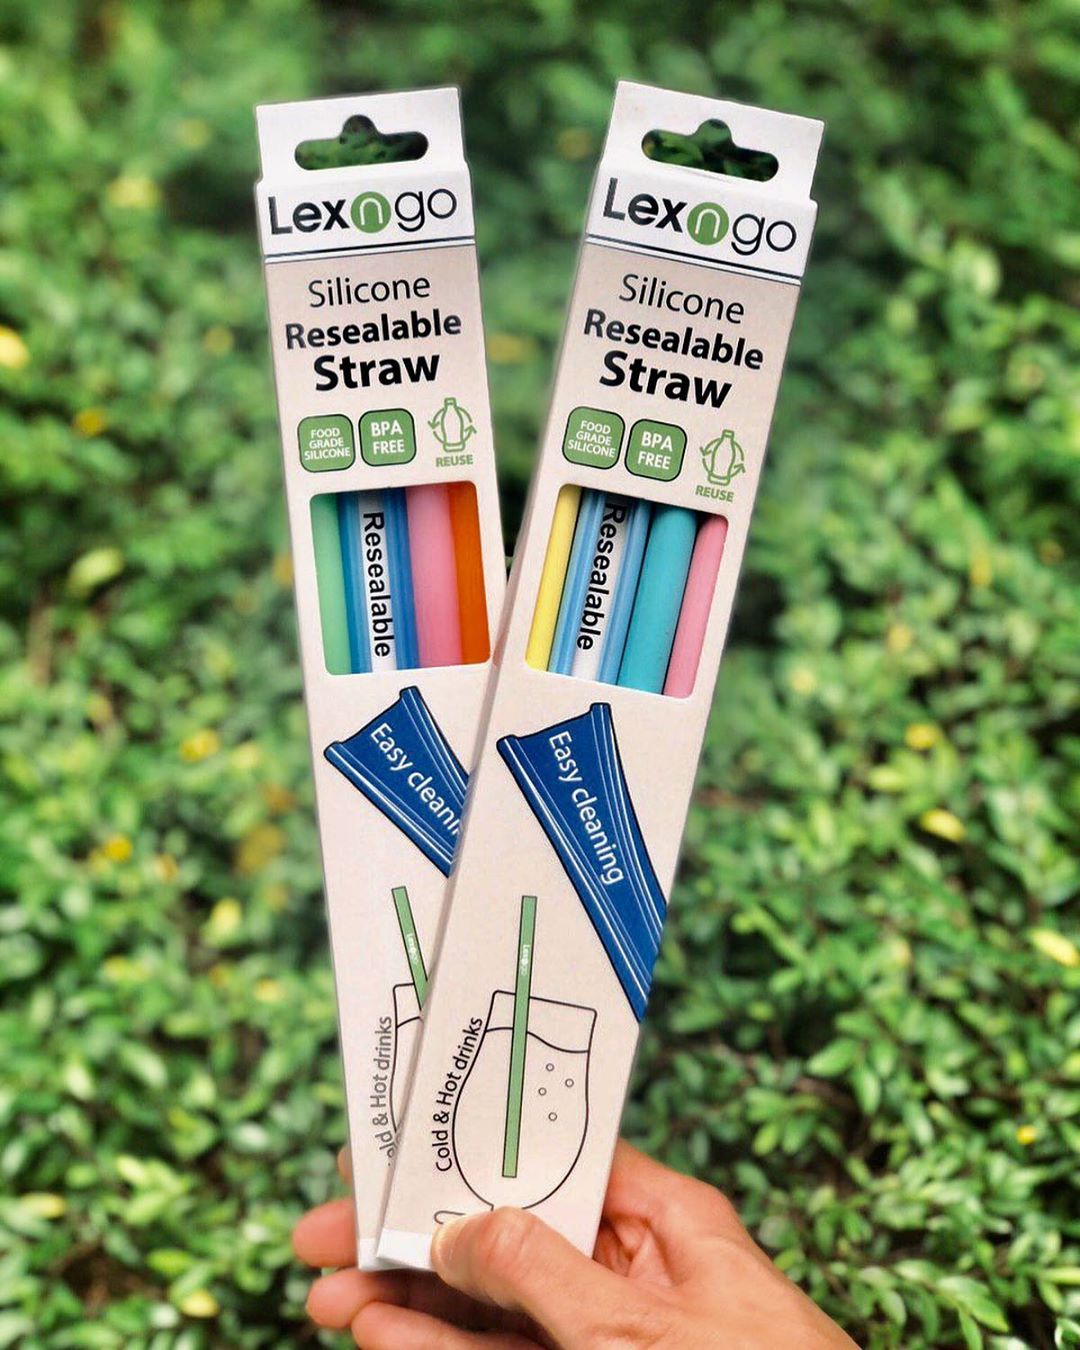 Lexngo Silicone Resealable Straw 可拆洗重用矽膠飲管 (Pack of 4)